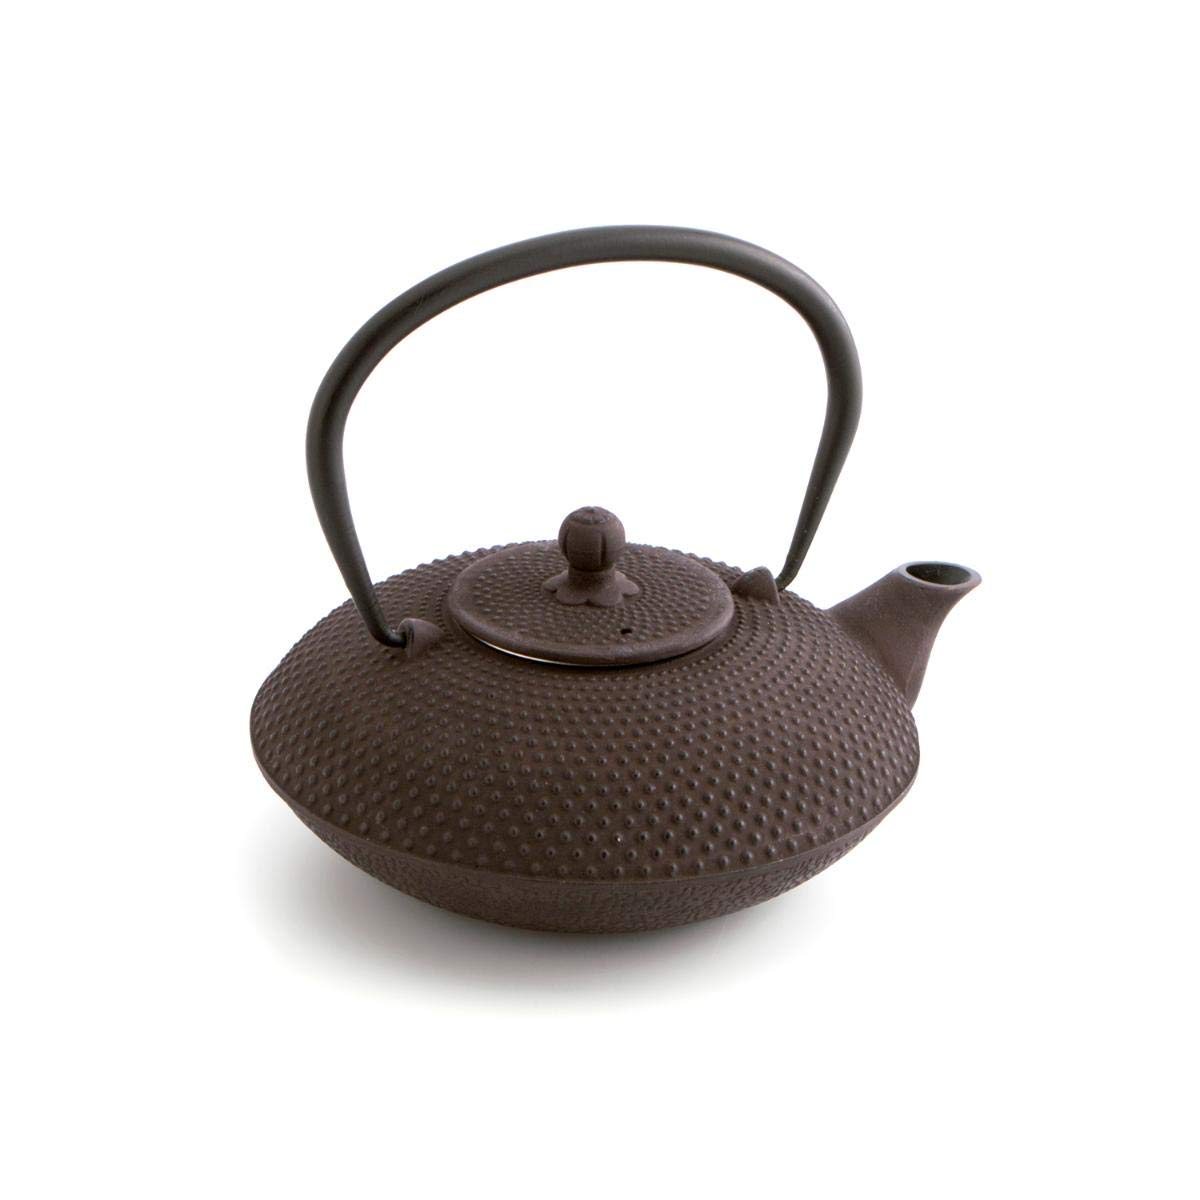 Quid Toyko - Cast Iron Teapot with Stainless Steel Filter, 0.8L